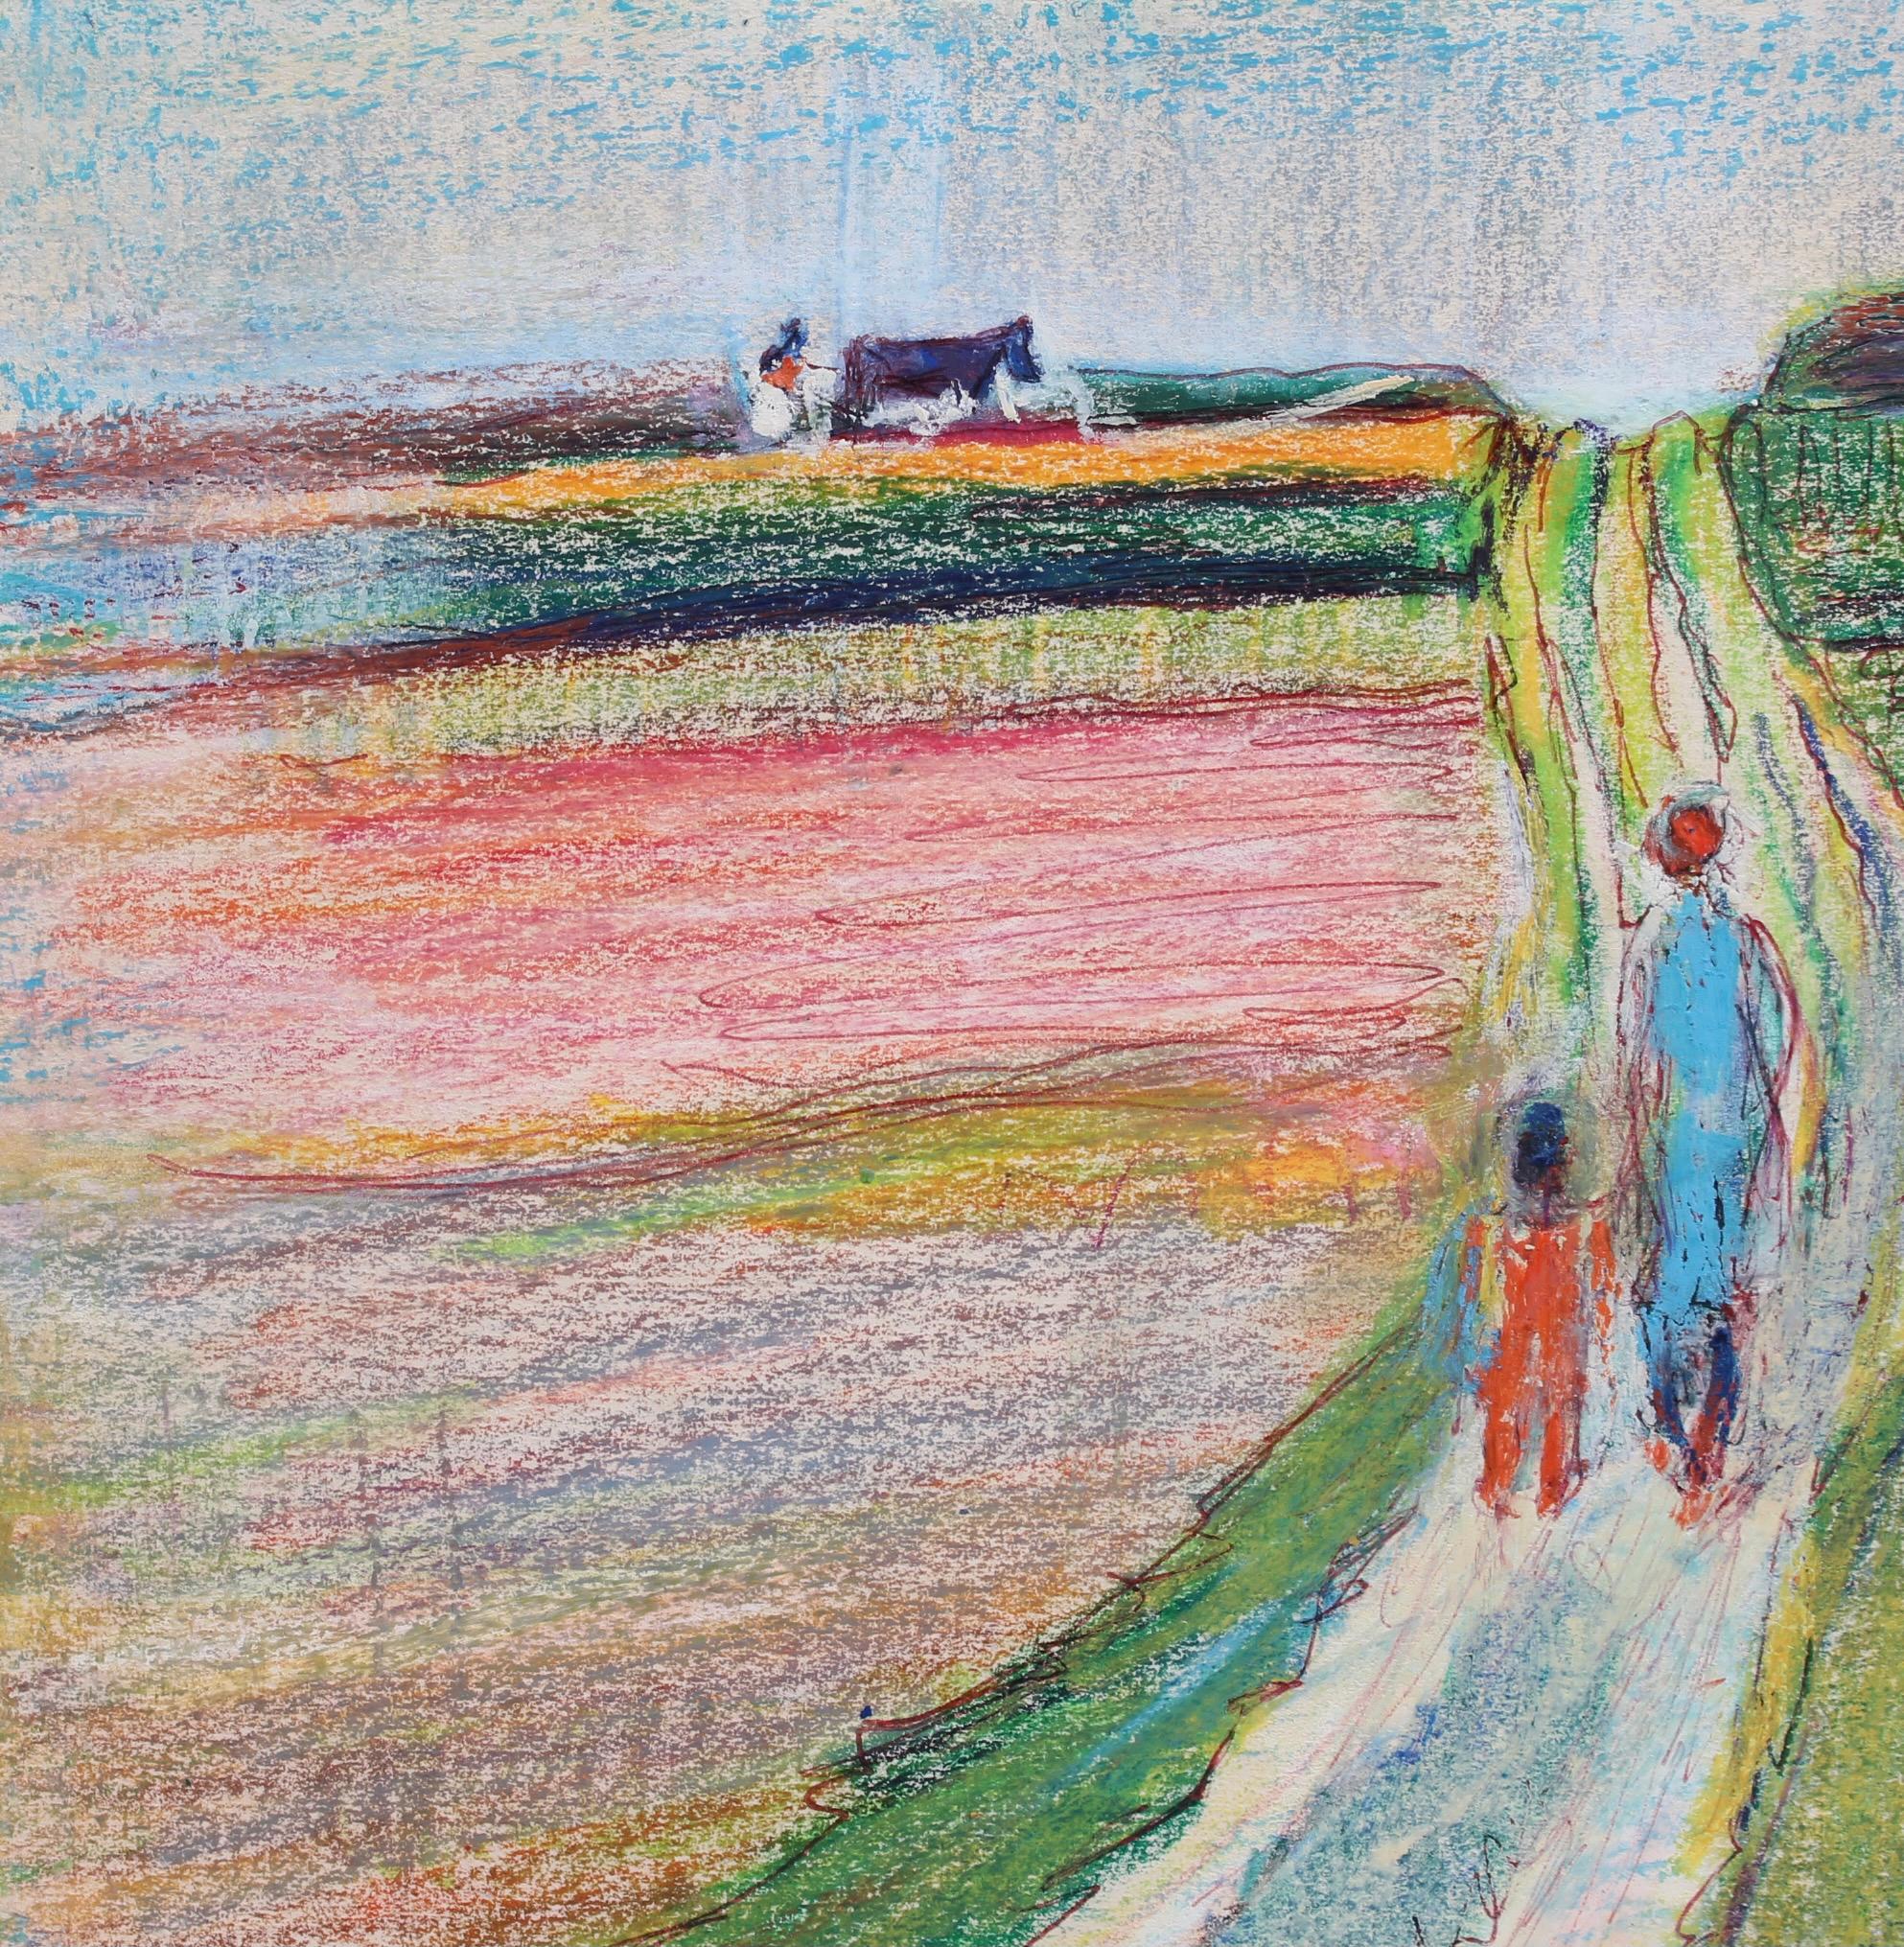 'On the Path', pastel and ink on art paper, by Suzanne Tourte (circa 1950s). Executed with a lively palette of colour, this is a surprisingly sophisticated modern work of art which belies its rather naive style. Flowered fields, green grassy